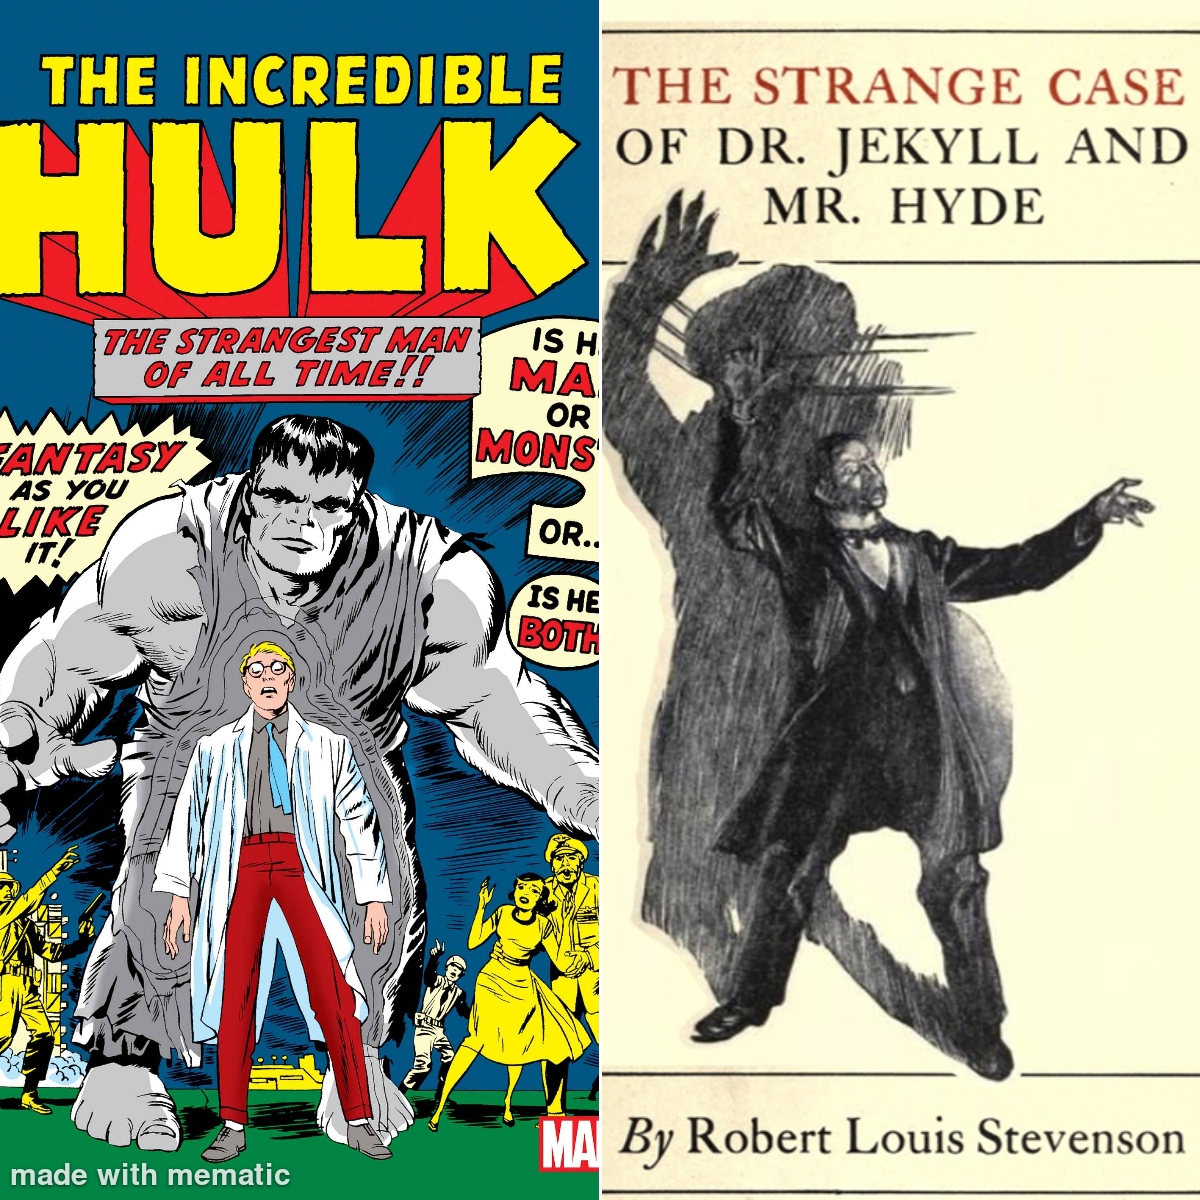 Covers of The Incredible Hulk and The Strange Case of Dr. Jekyll and Mr. Hyde